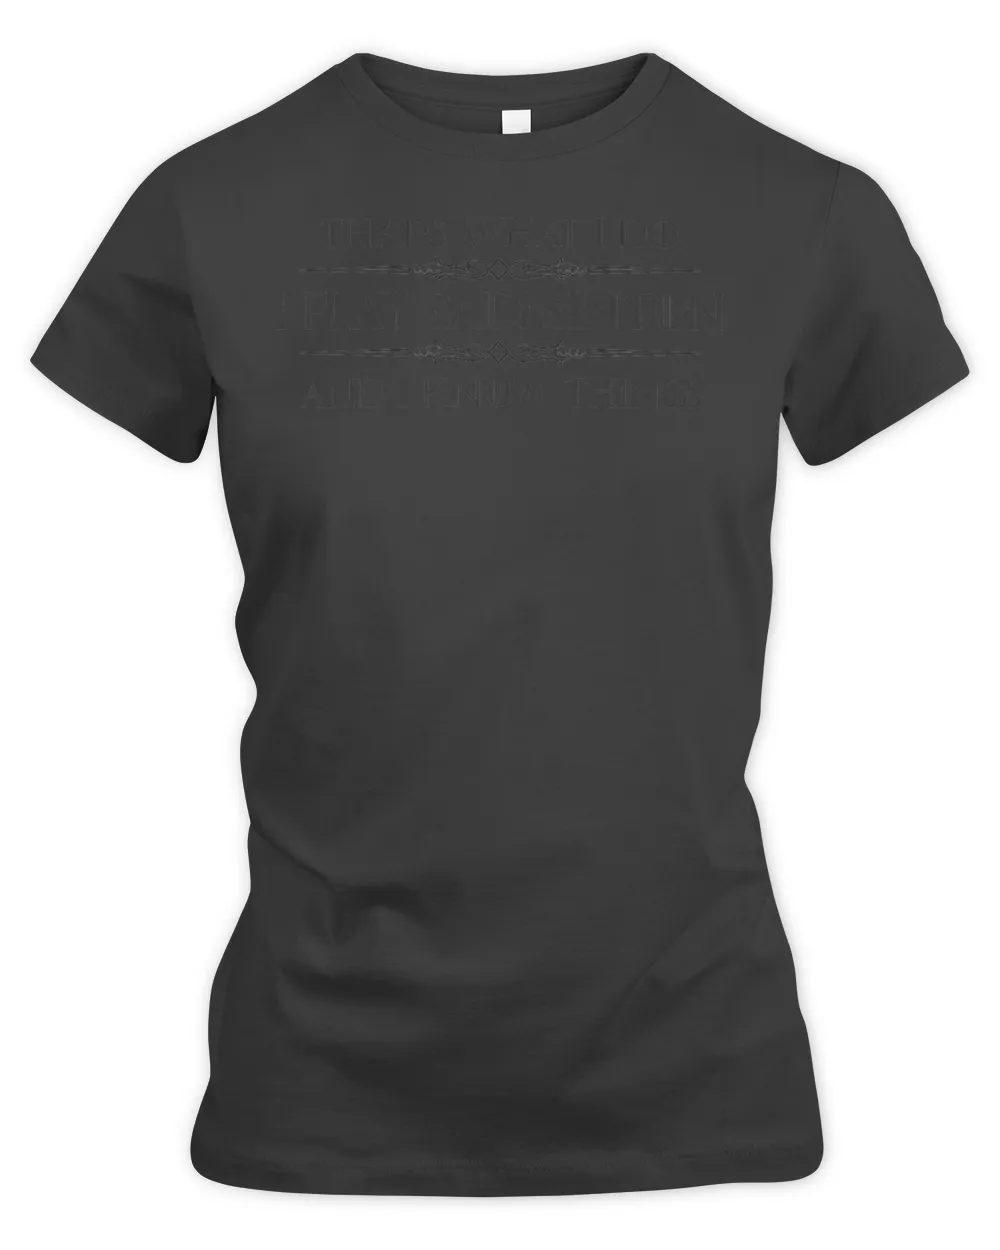 Badminton Gifts for Players &amp; Coaches - I Play Badminton Premium T-Shirt